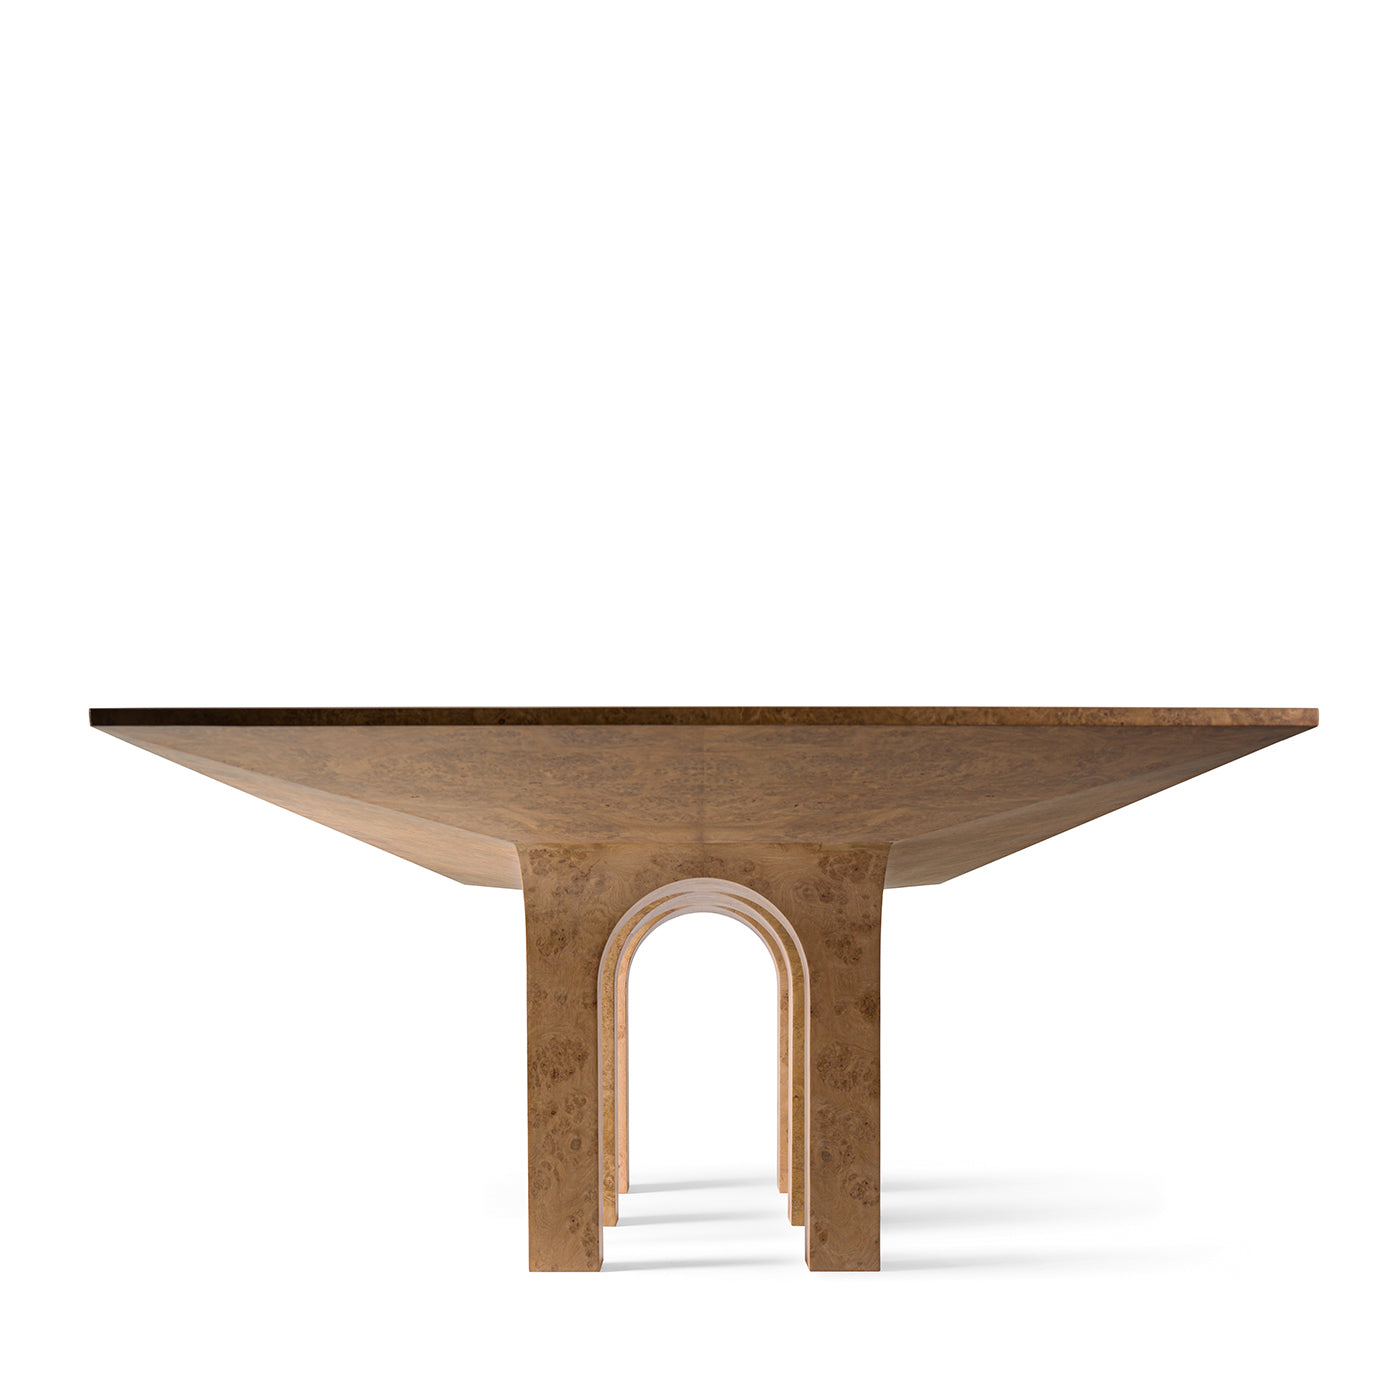 ARCHI Dining Table in burl by StorageMilano - Alternative view 2